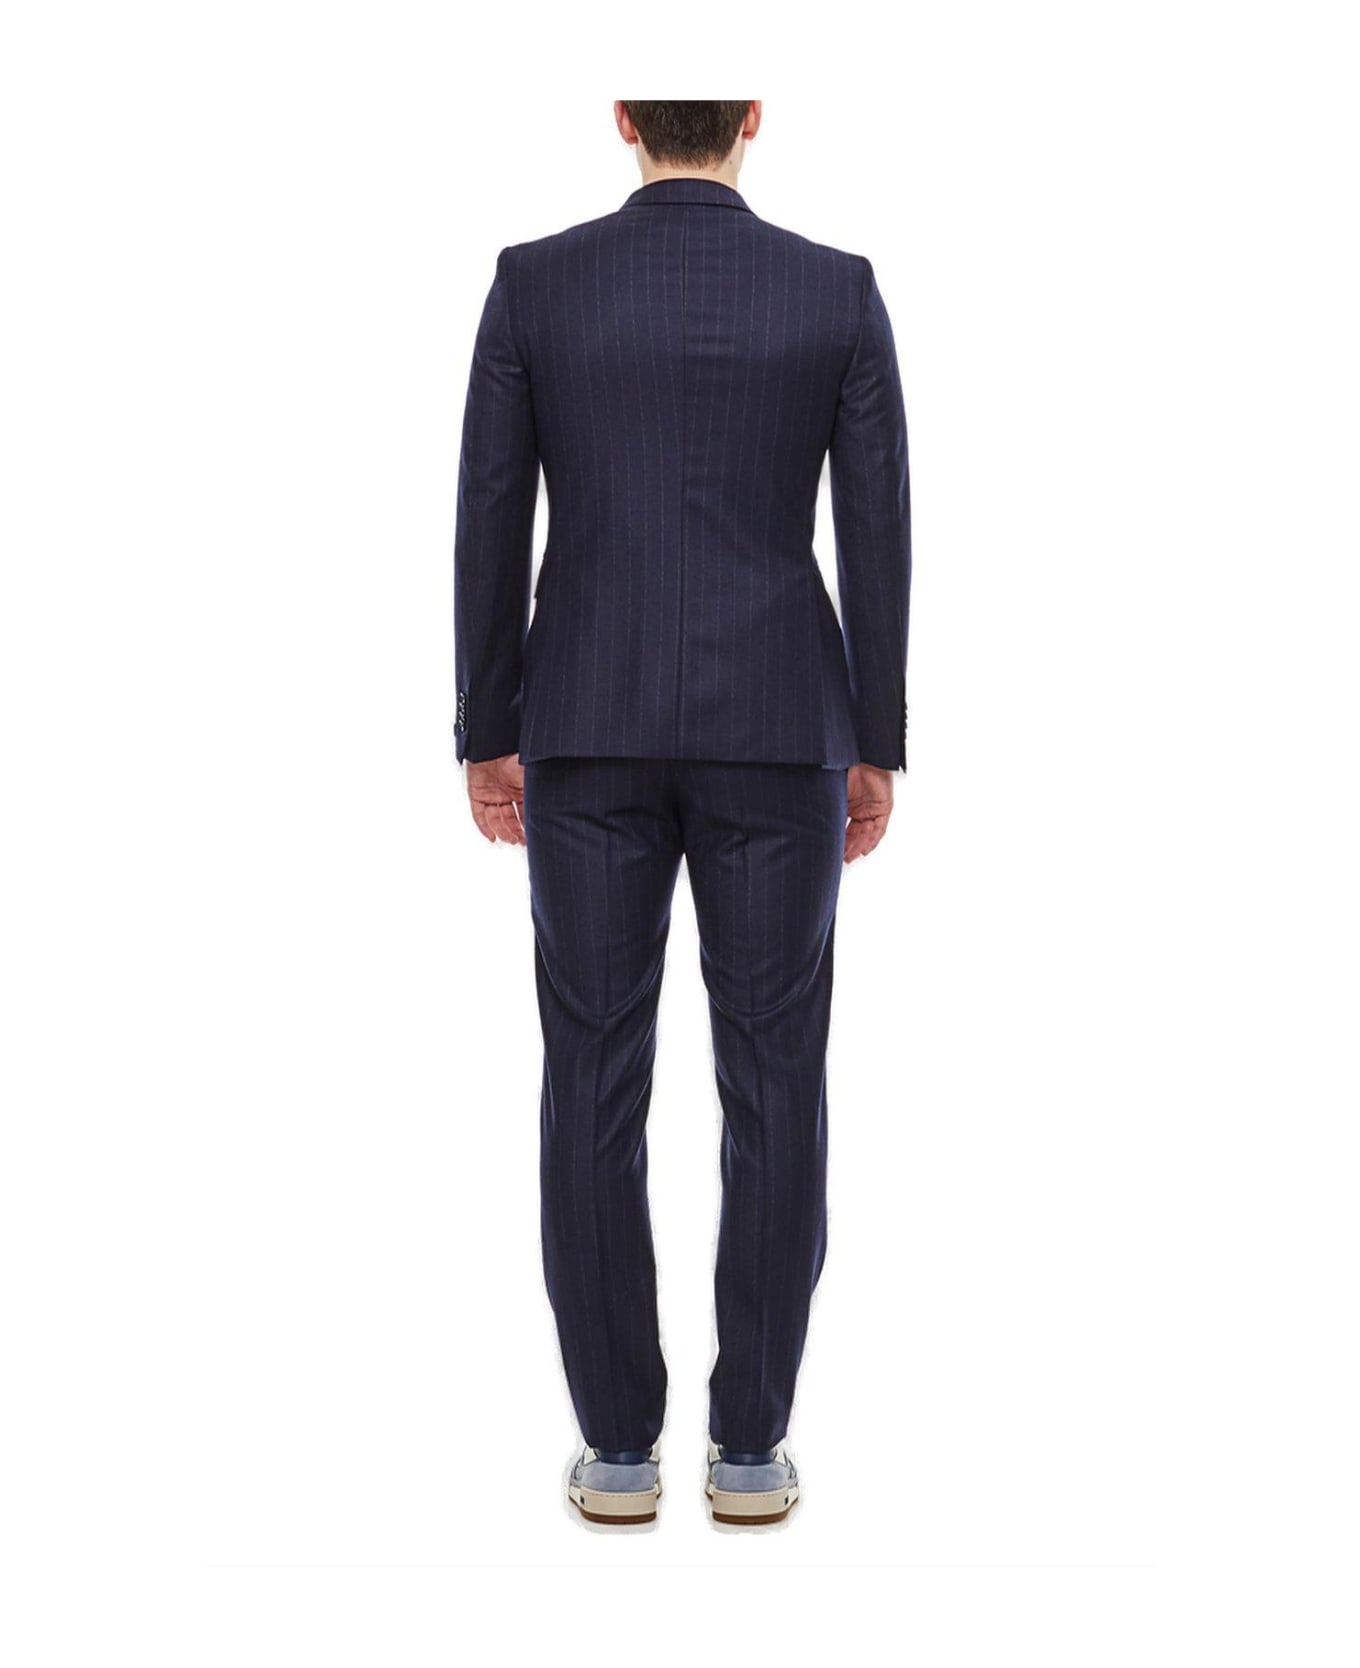 Tagliatore Double-breasted Two-piece Suit Set - Blu